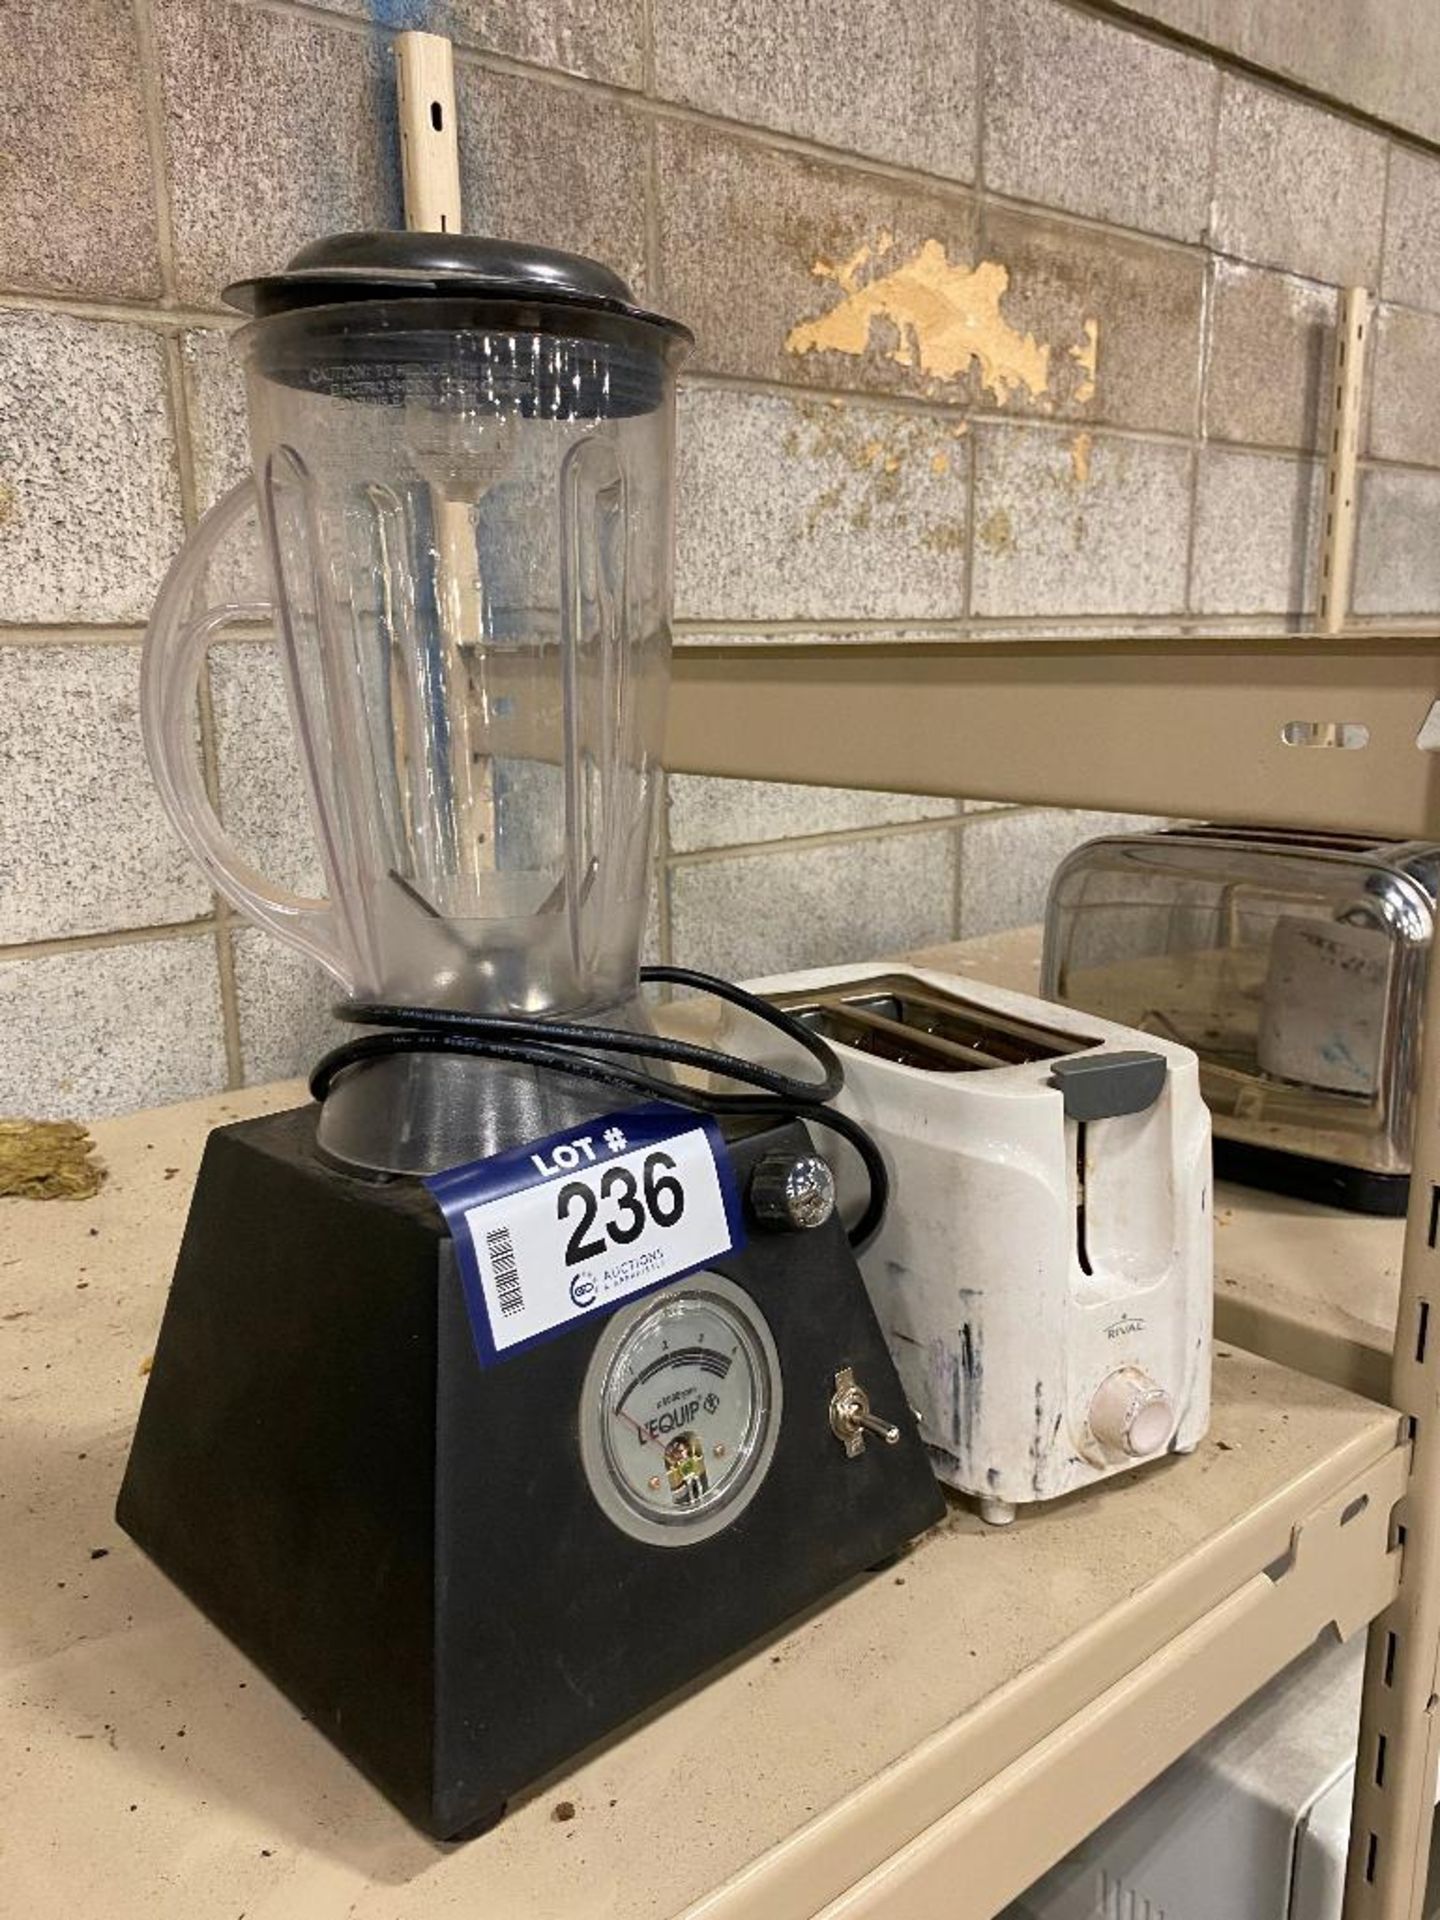 Lot of Blender and Toaster